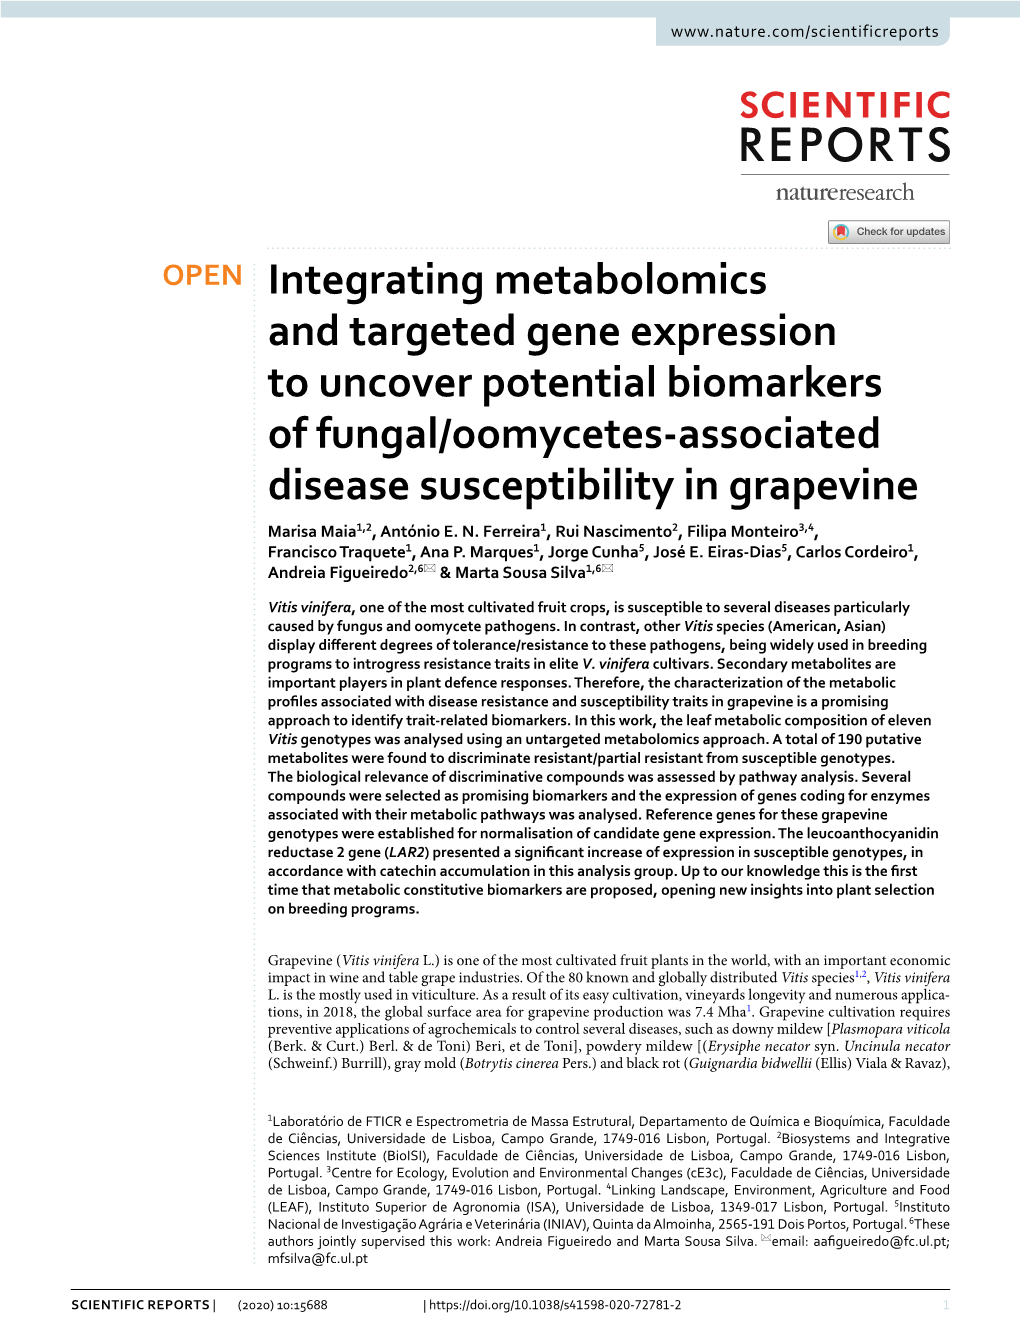 Integrating Metabolomics and Targeted Gene Expression to Uncover